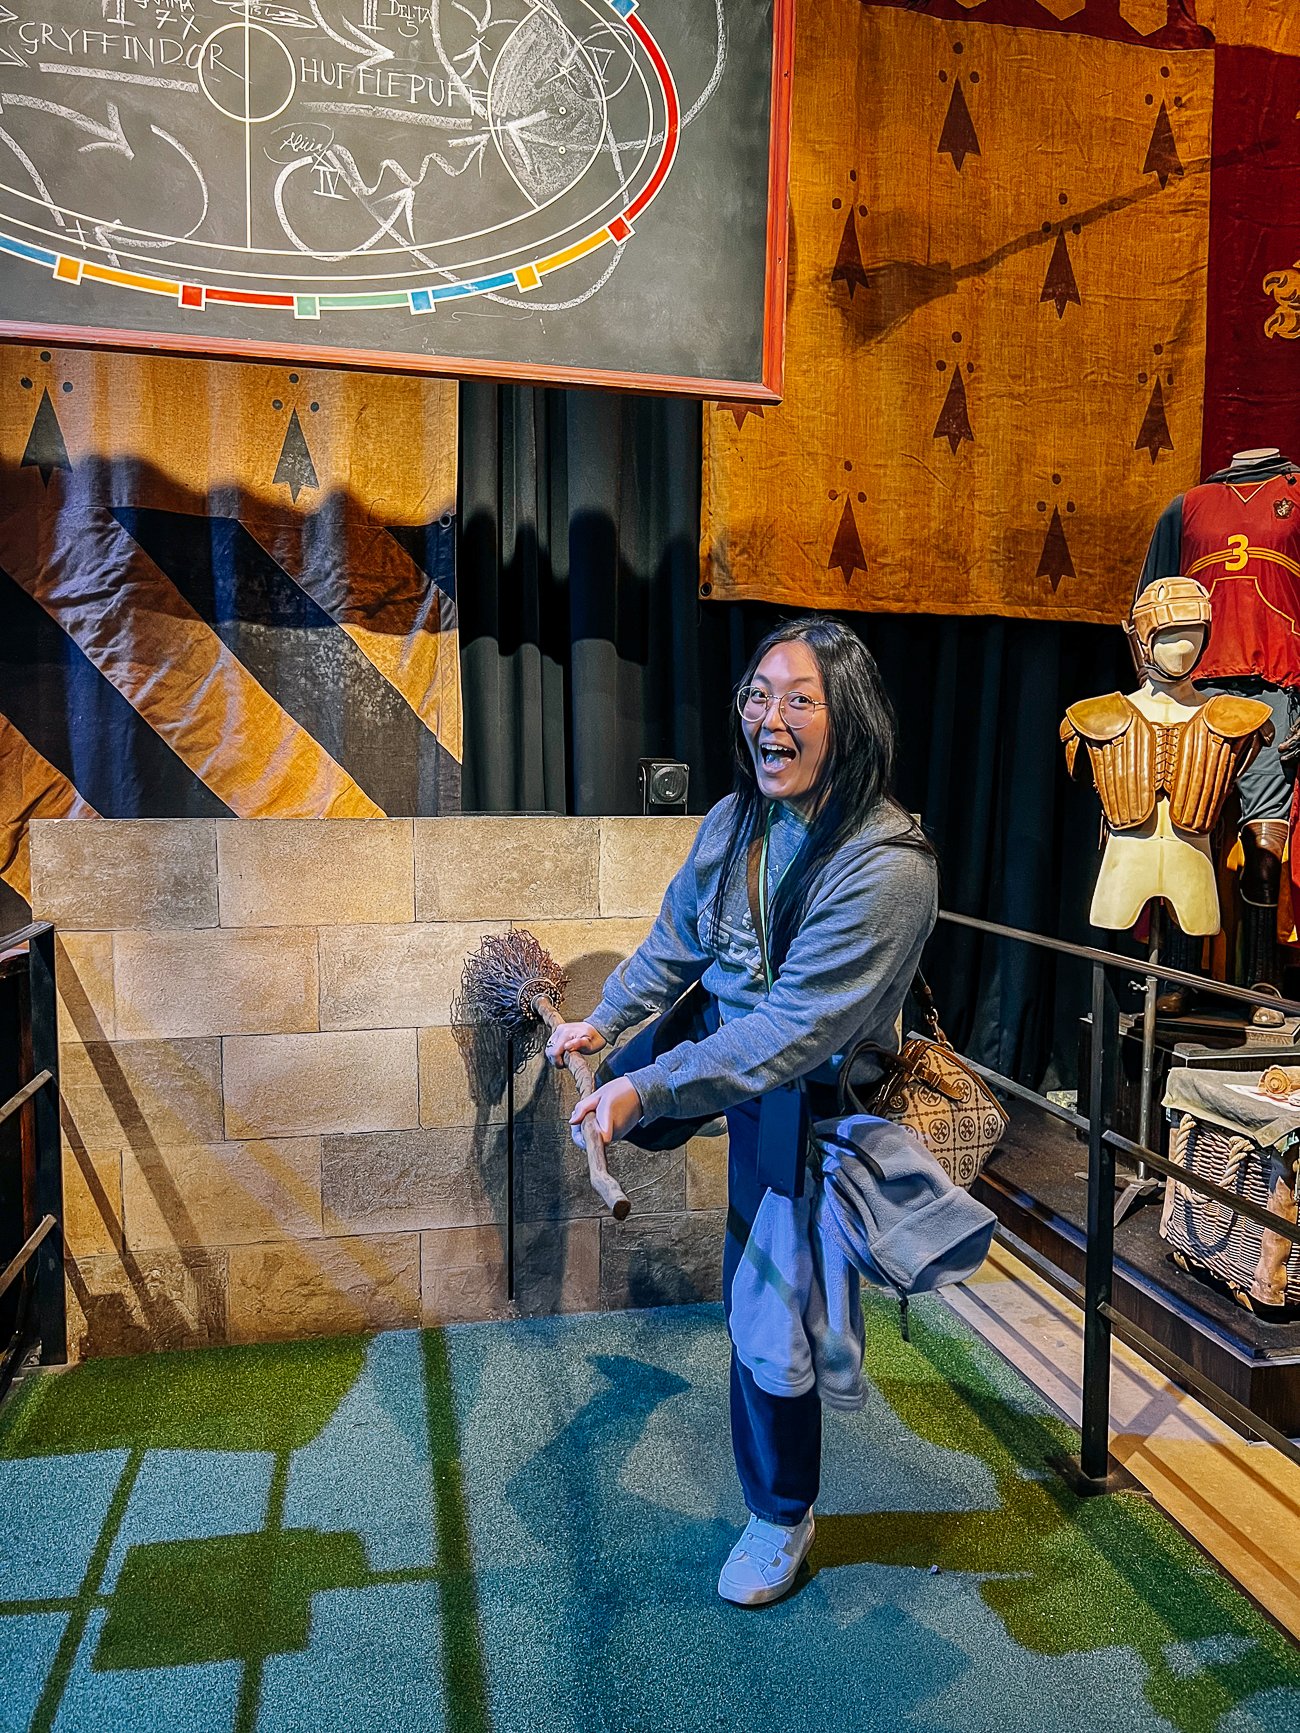 Kaitlin getting on a broomstick at Harry Potter studio tour